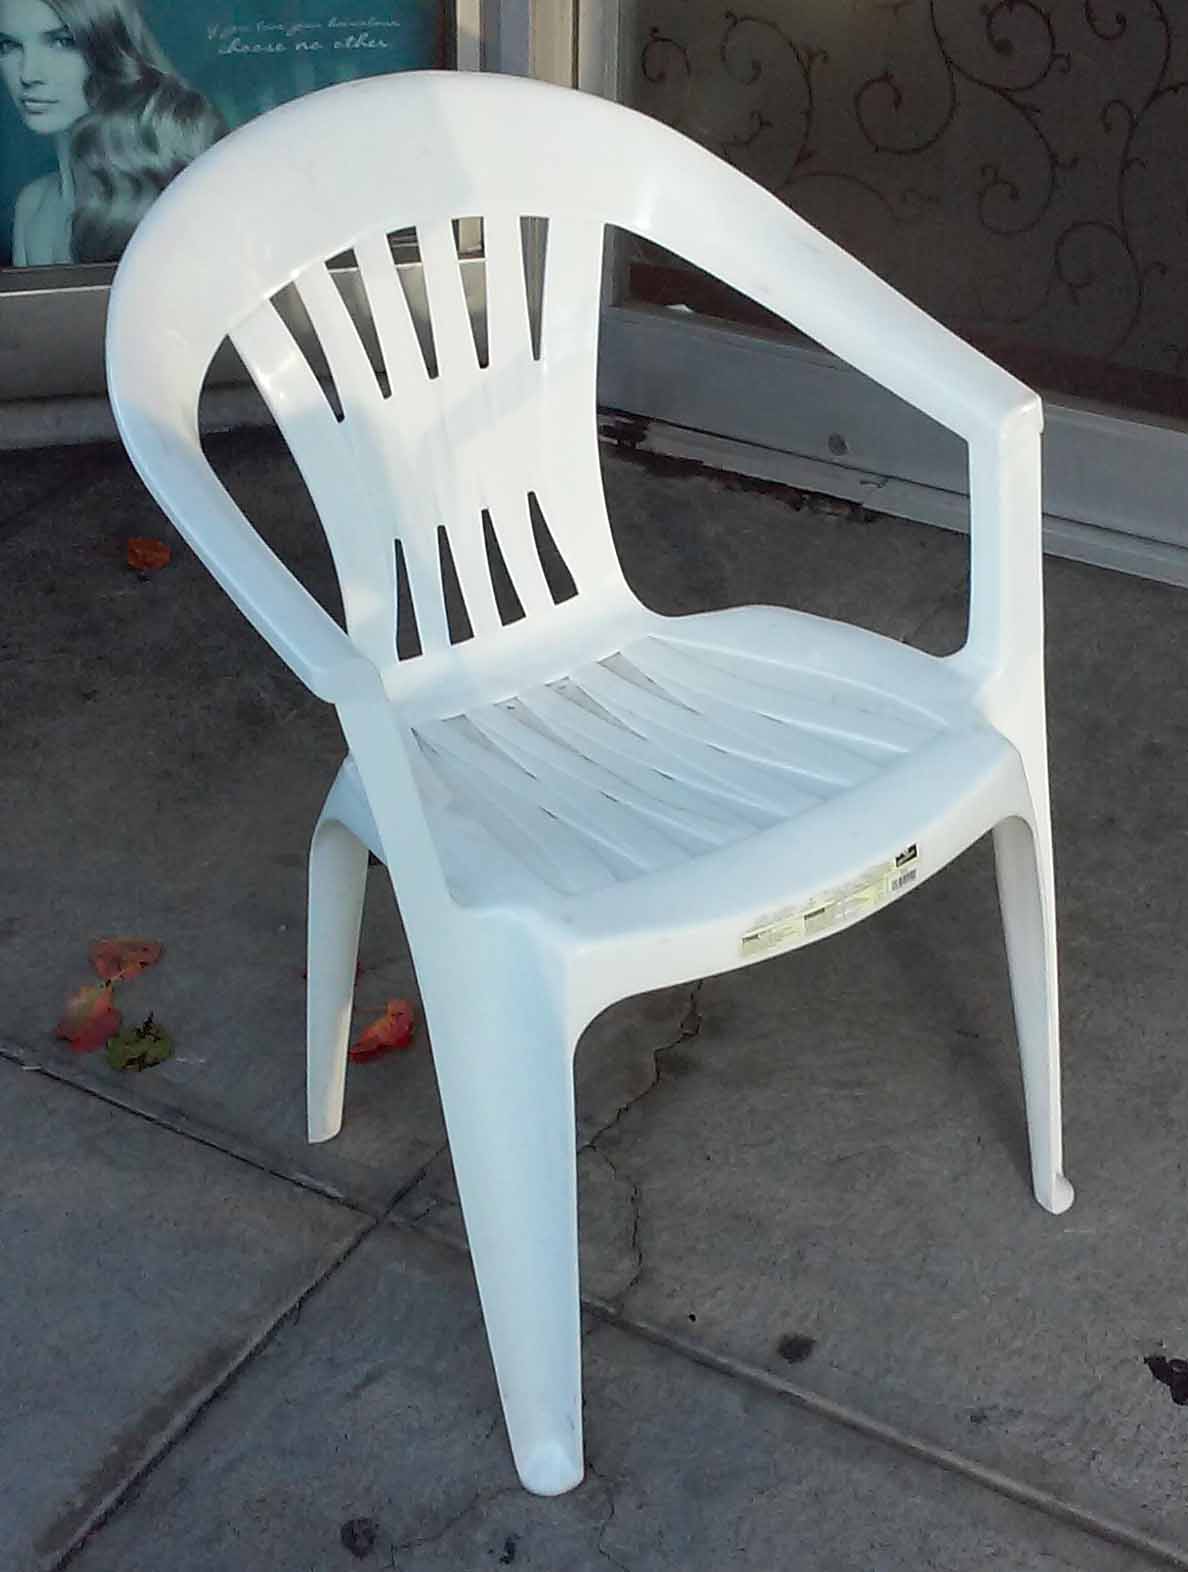 UHURU FURNITURE & COLLECTIBLES: SOLD Plastic Patio Chairs - $5 each (we